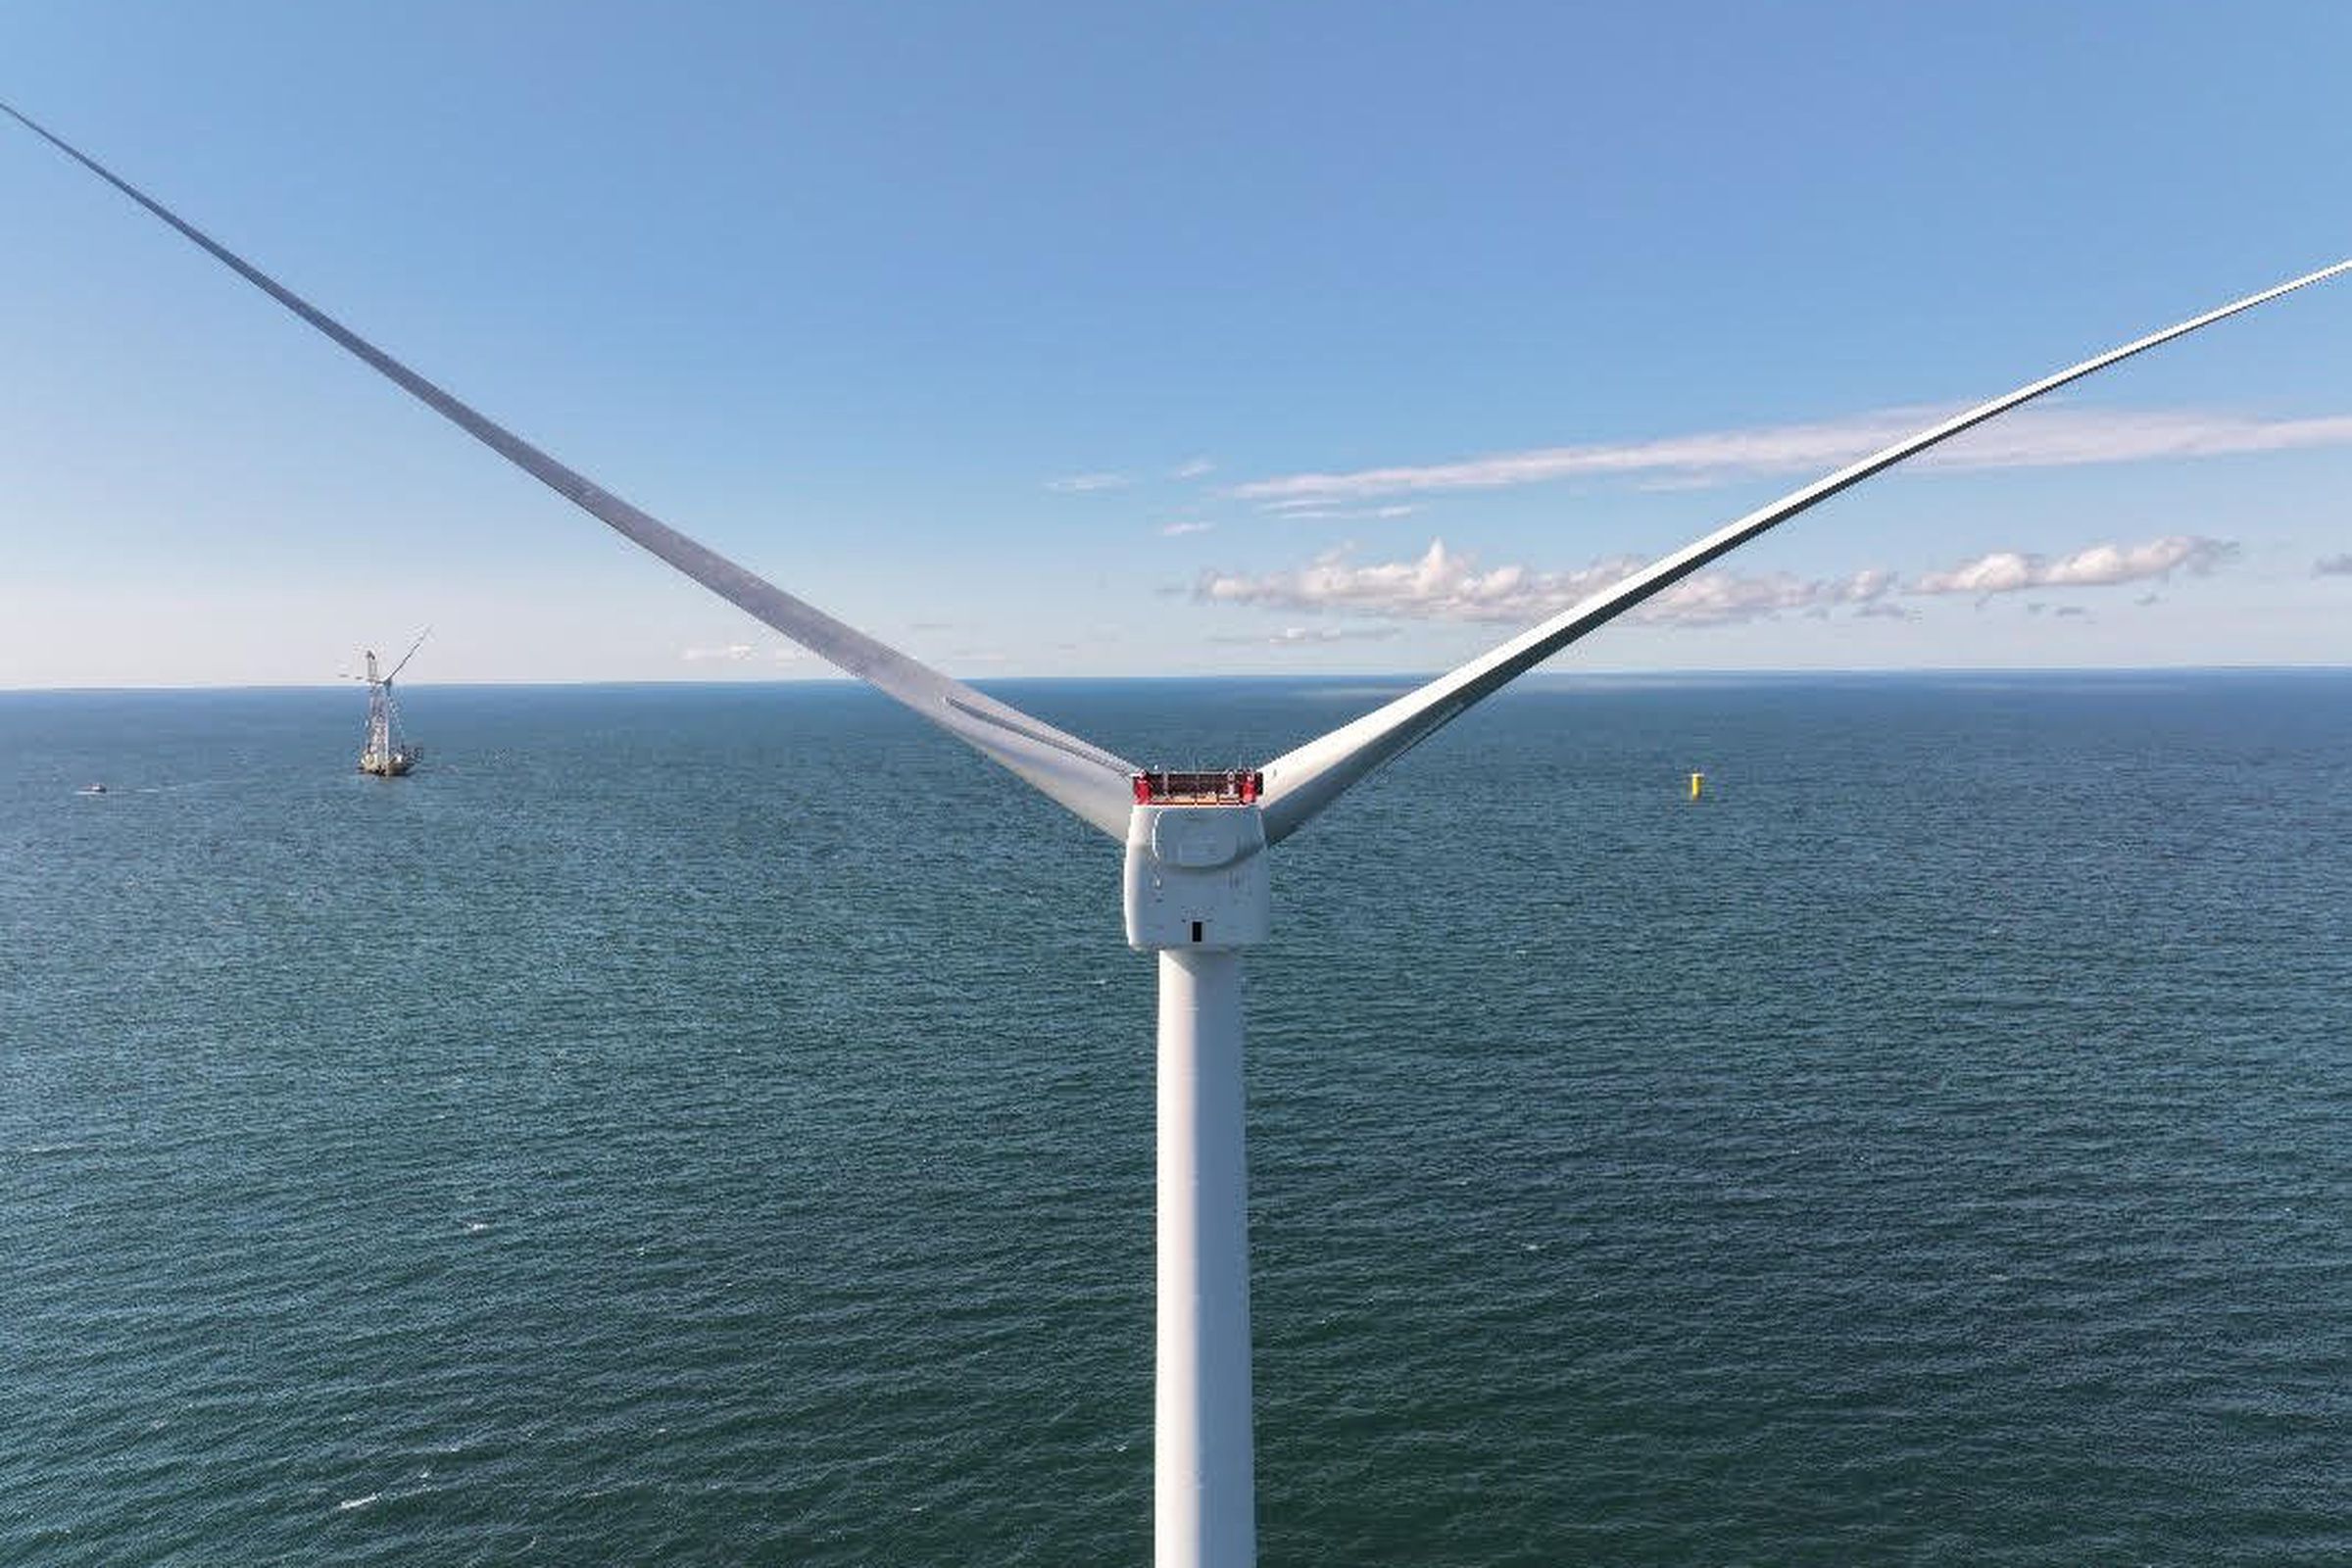 A close-up view of a wind turbine standing in the sea.